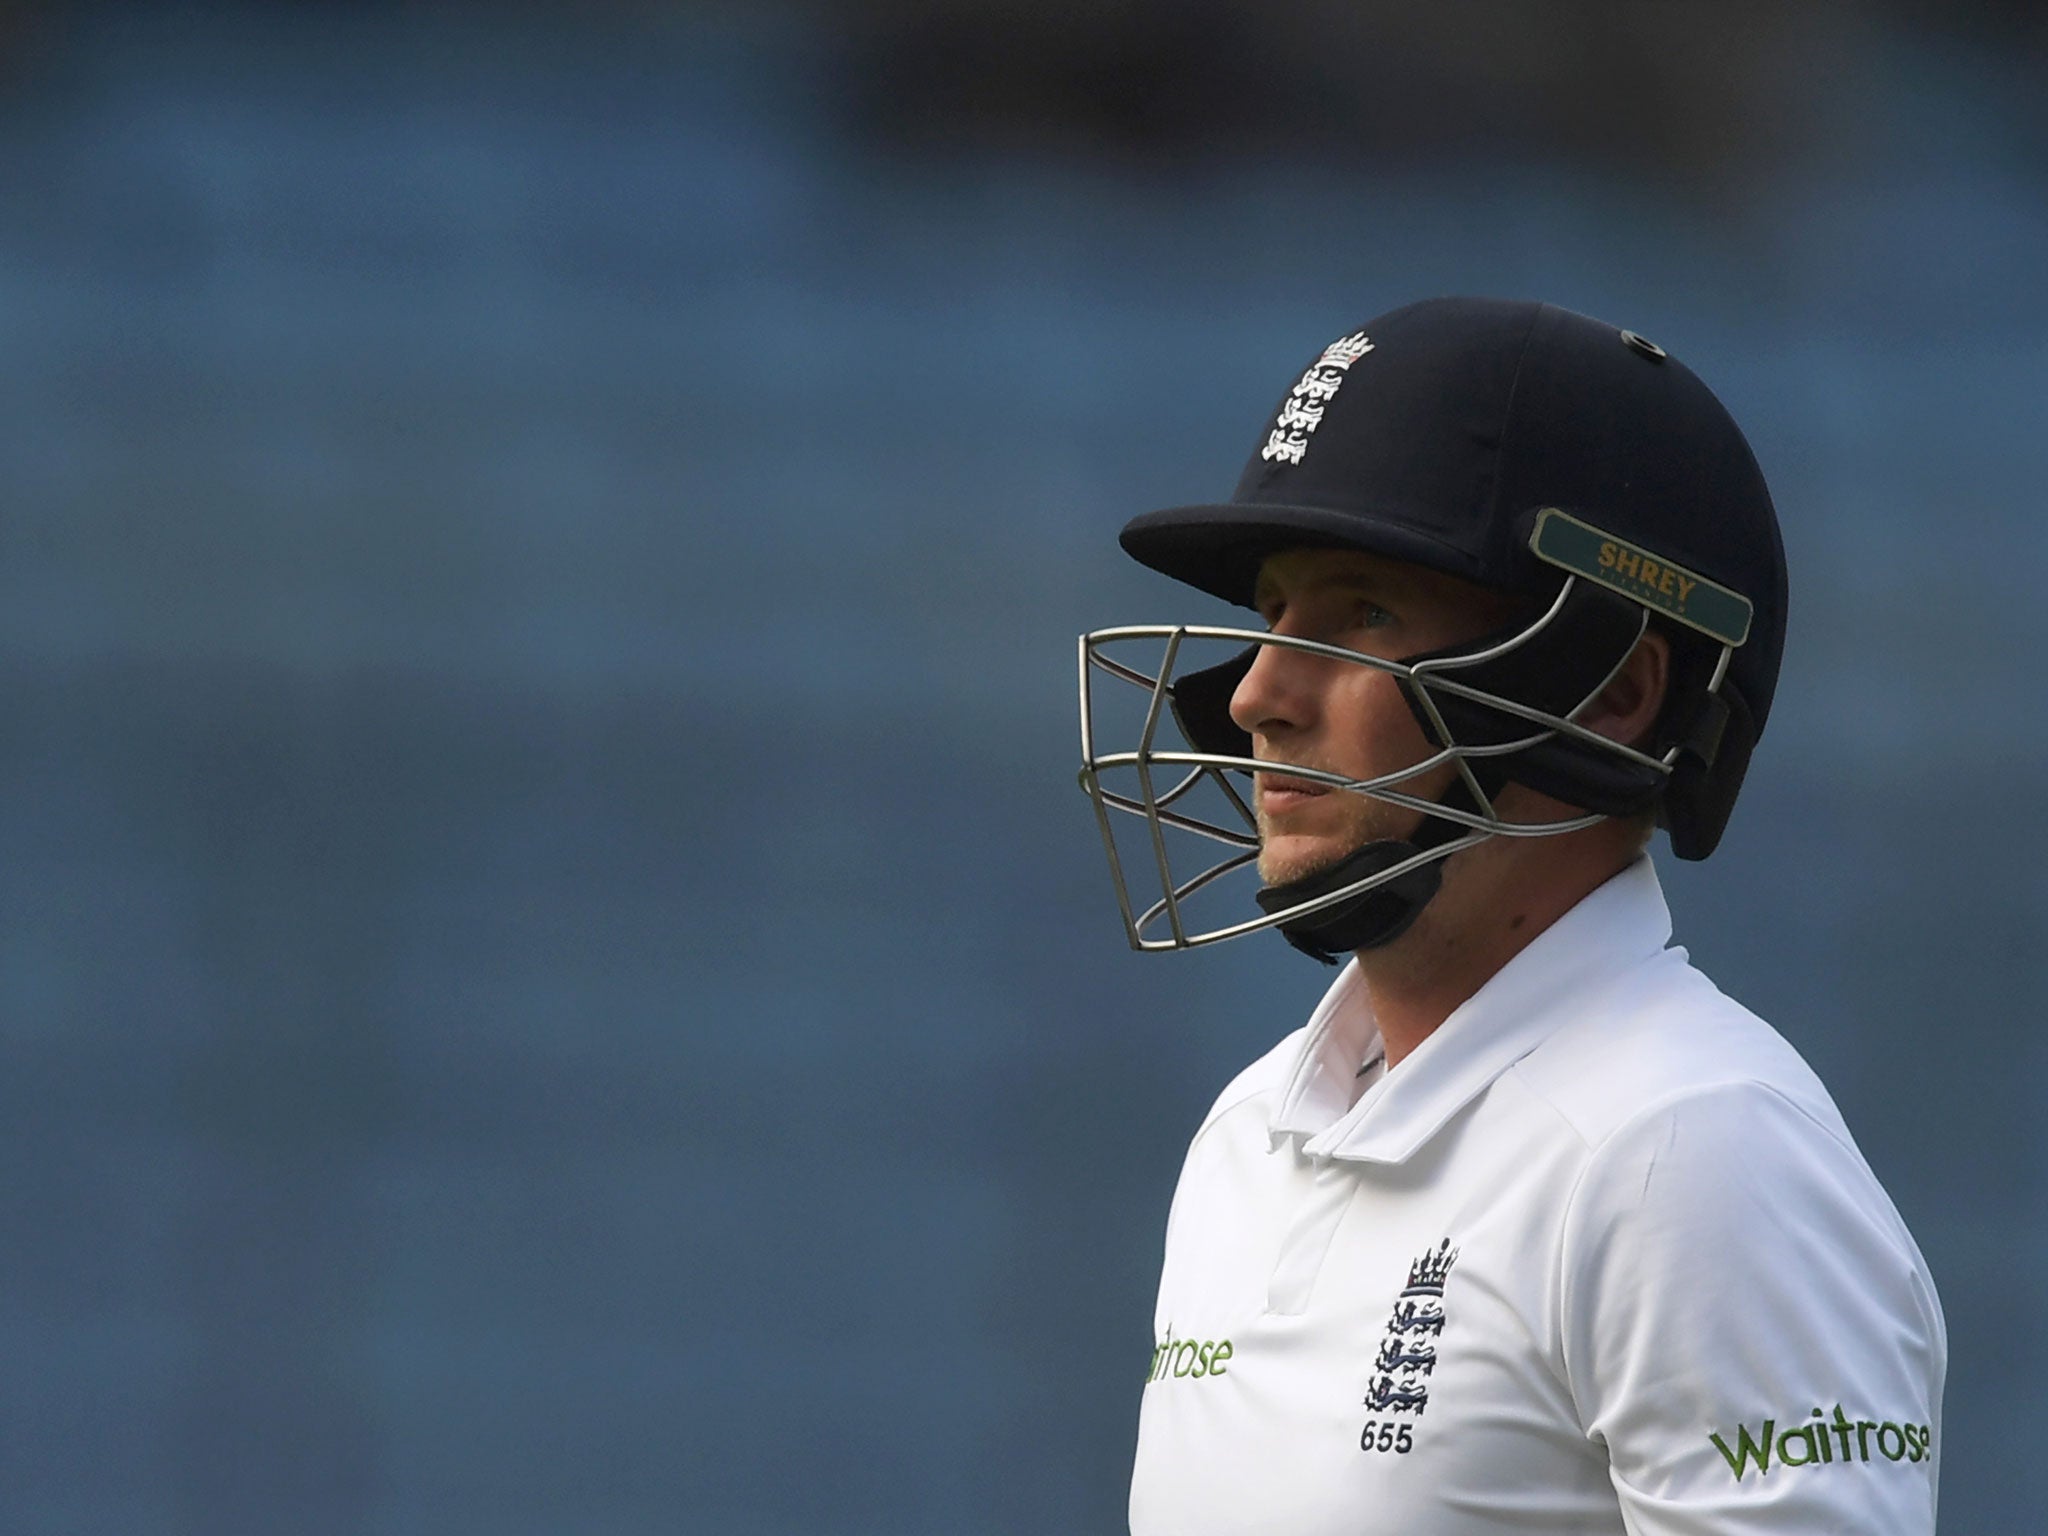 Root has emerged as a leading candidate to replace Alastair Cook who recently stepped down from the role of captain